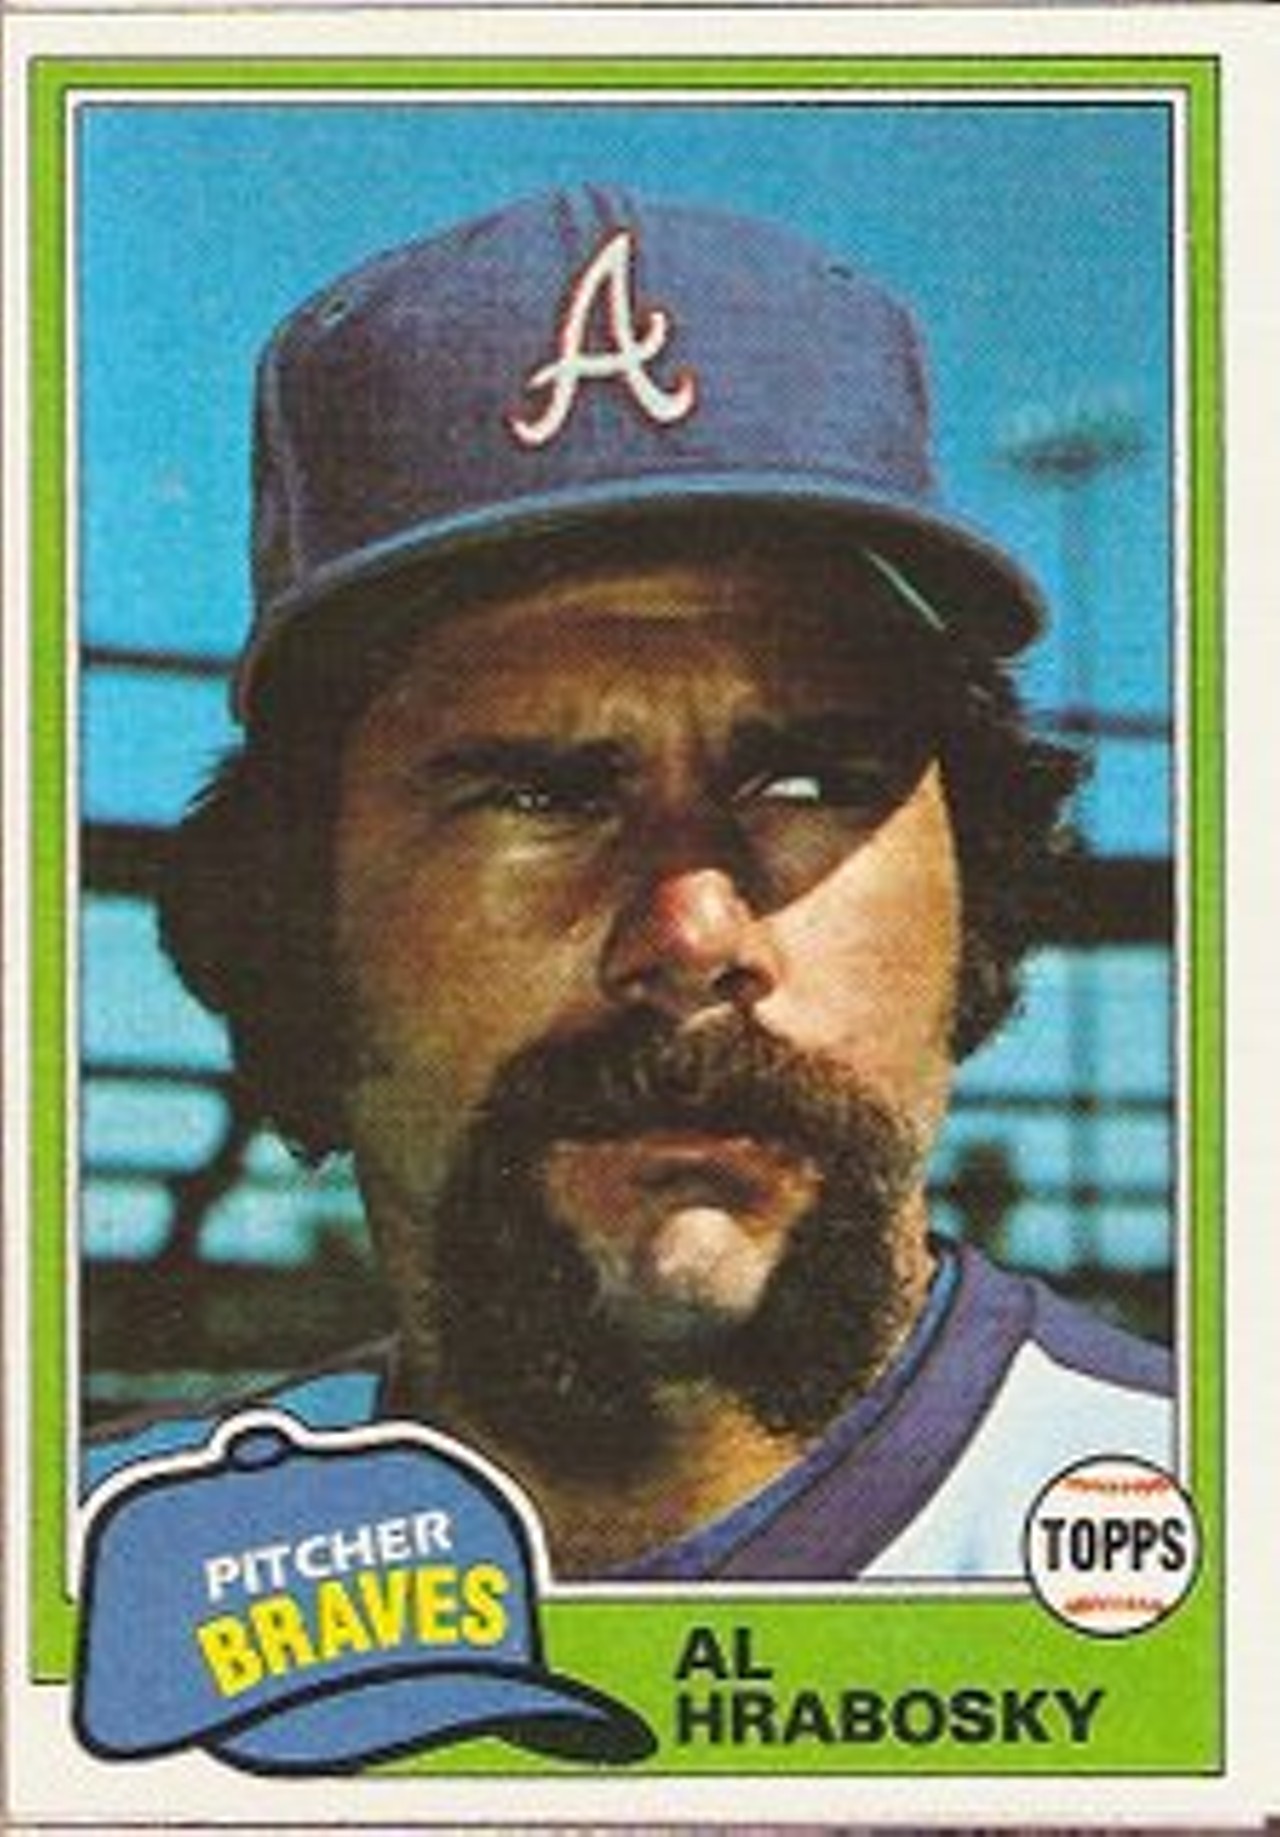 Baseball pitcher Al Hrabosky was known as the "Mad Hungarian."